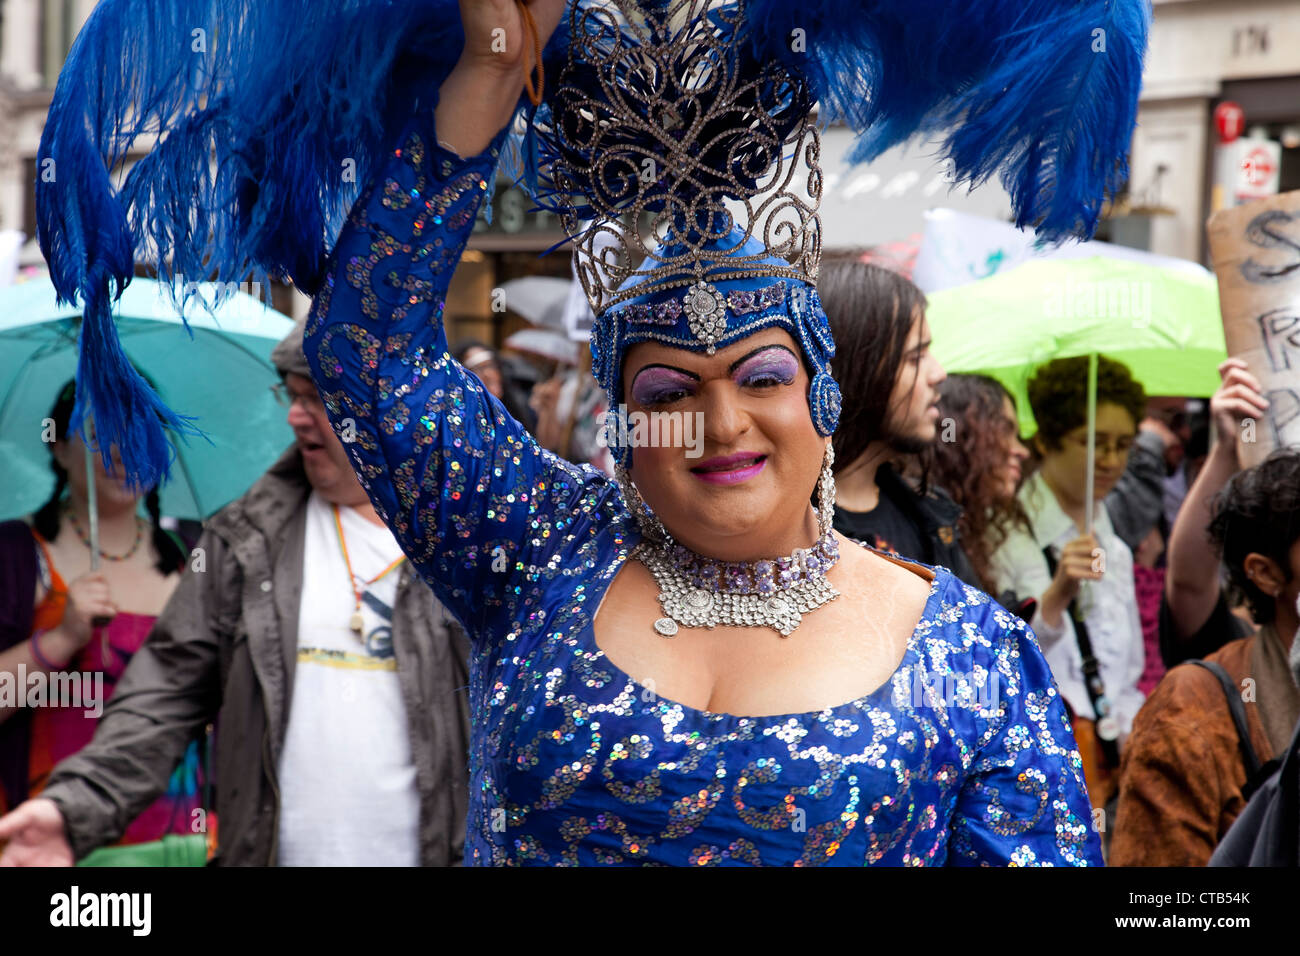 A drag queen at World Pride in London - 7 July 2012 Stock Photo